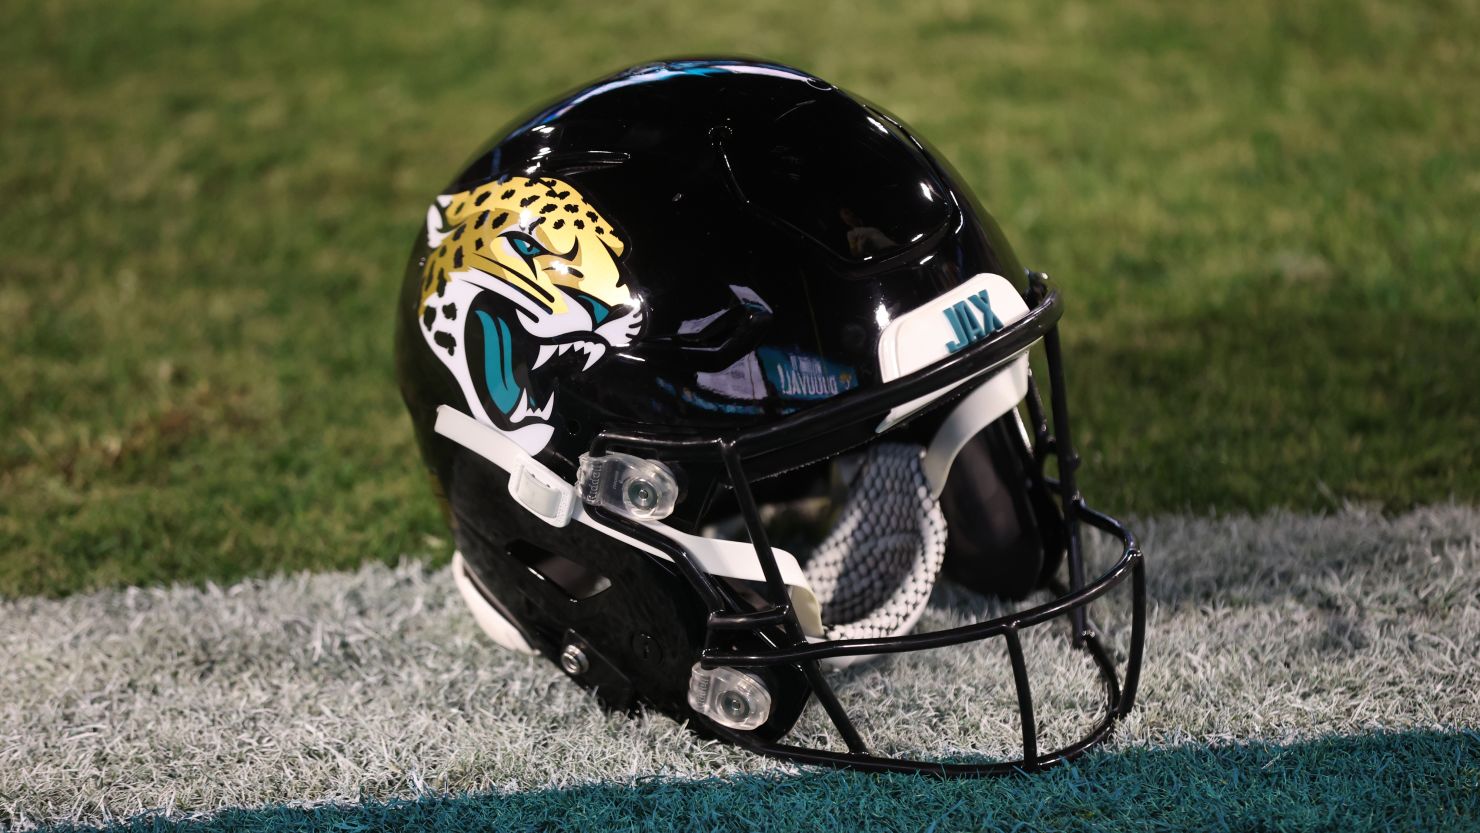 A former employee of the Jacksonville Jaguars was sentenced to more than 6 years after stealing $22 million from the team.